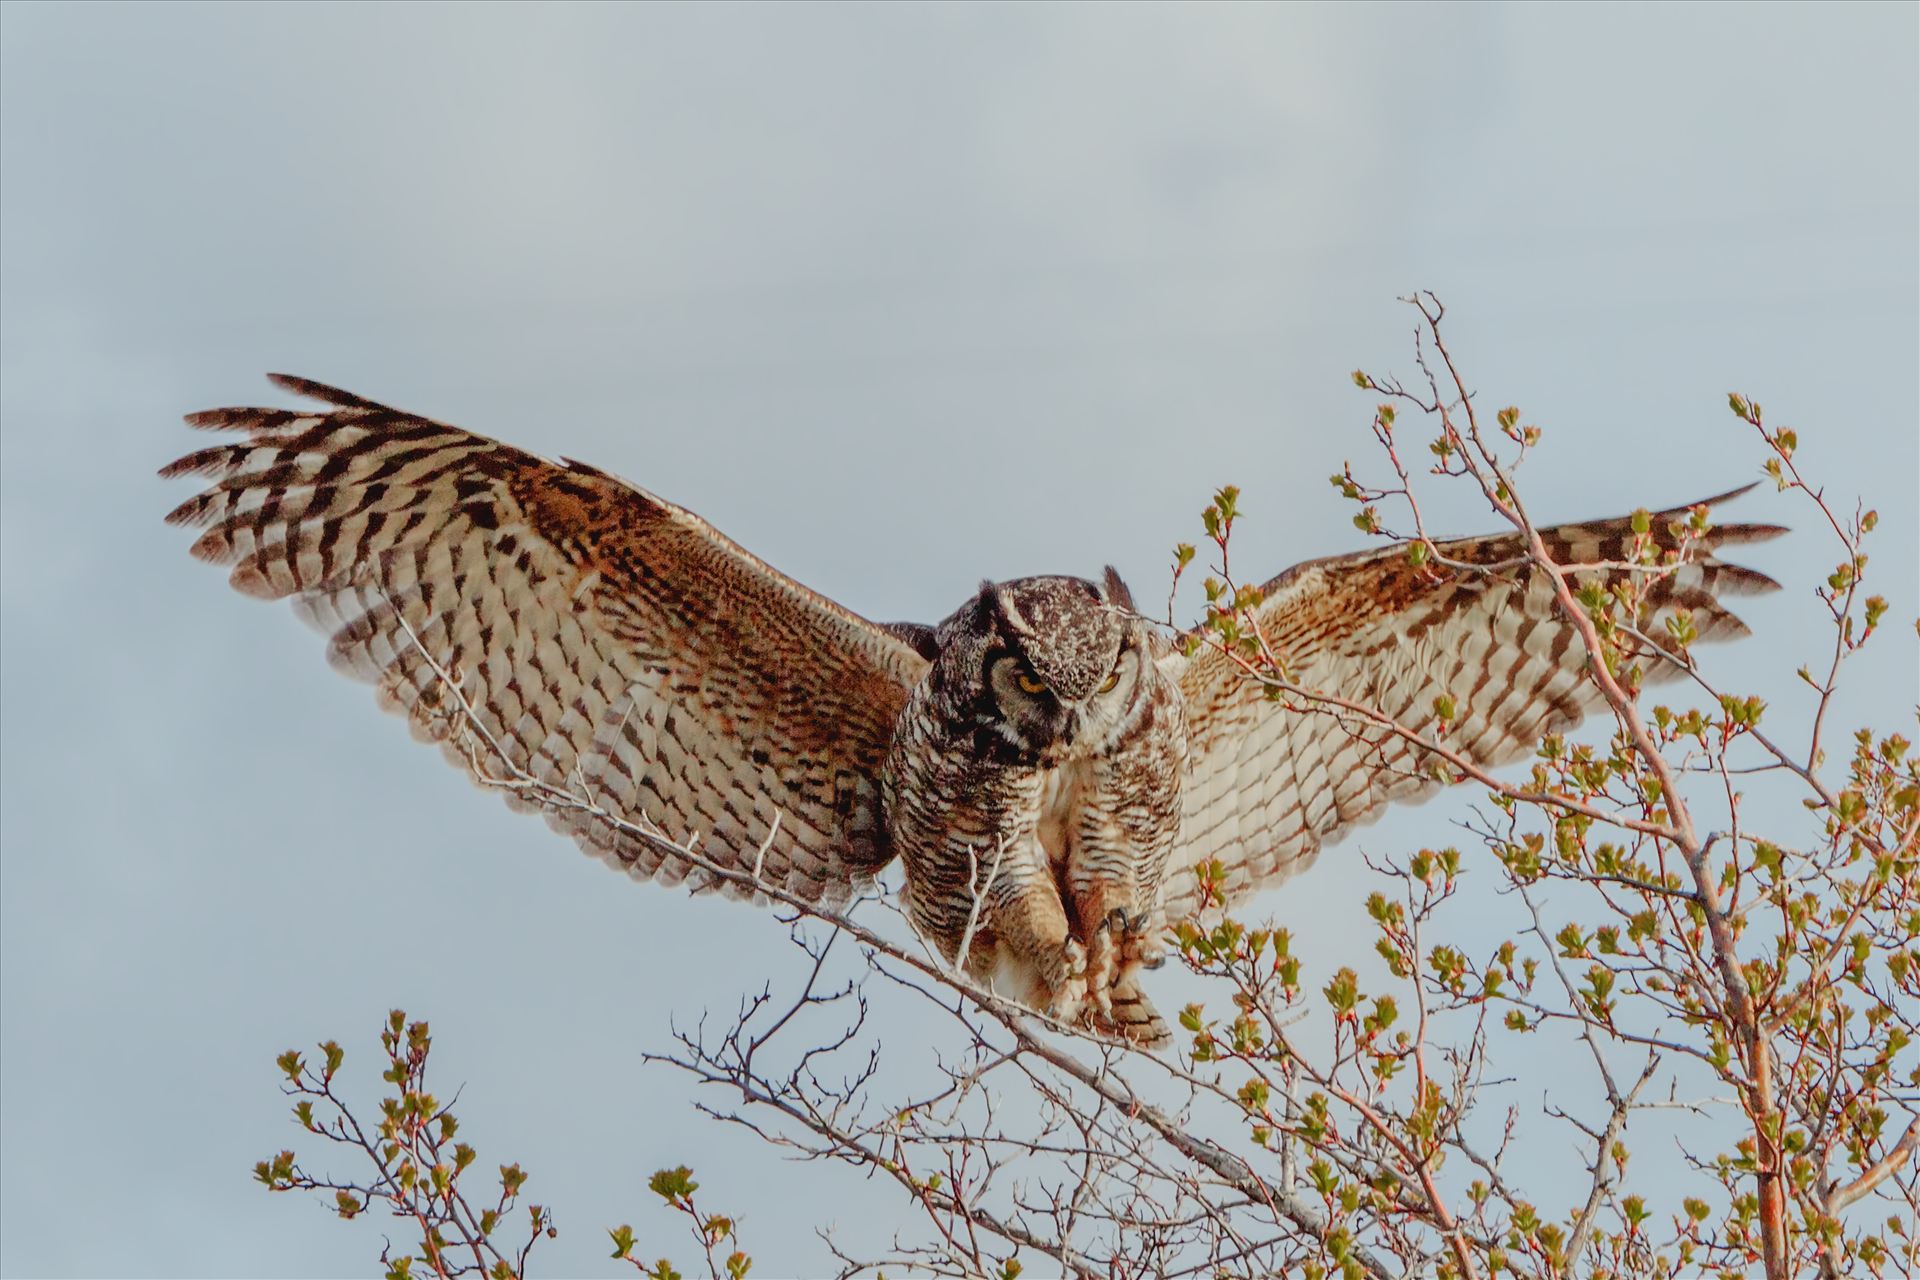 Landing Gear Down Female Great Horned Owl, with claws outstretched as she is ready to land in the tree by Bear Conceptions Photography